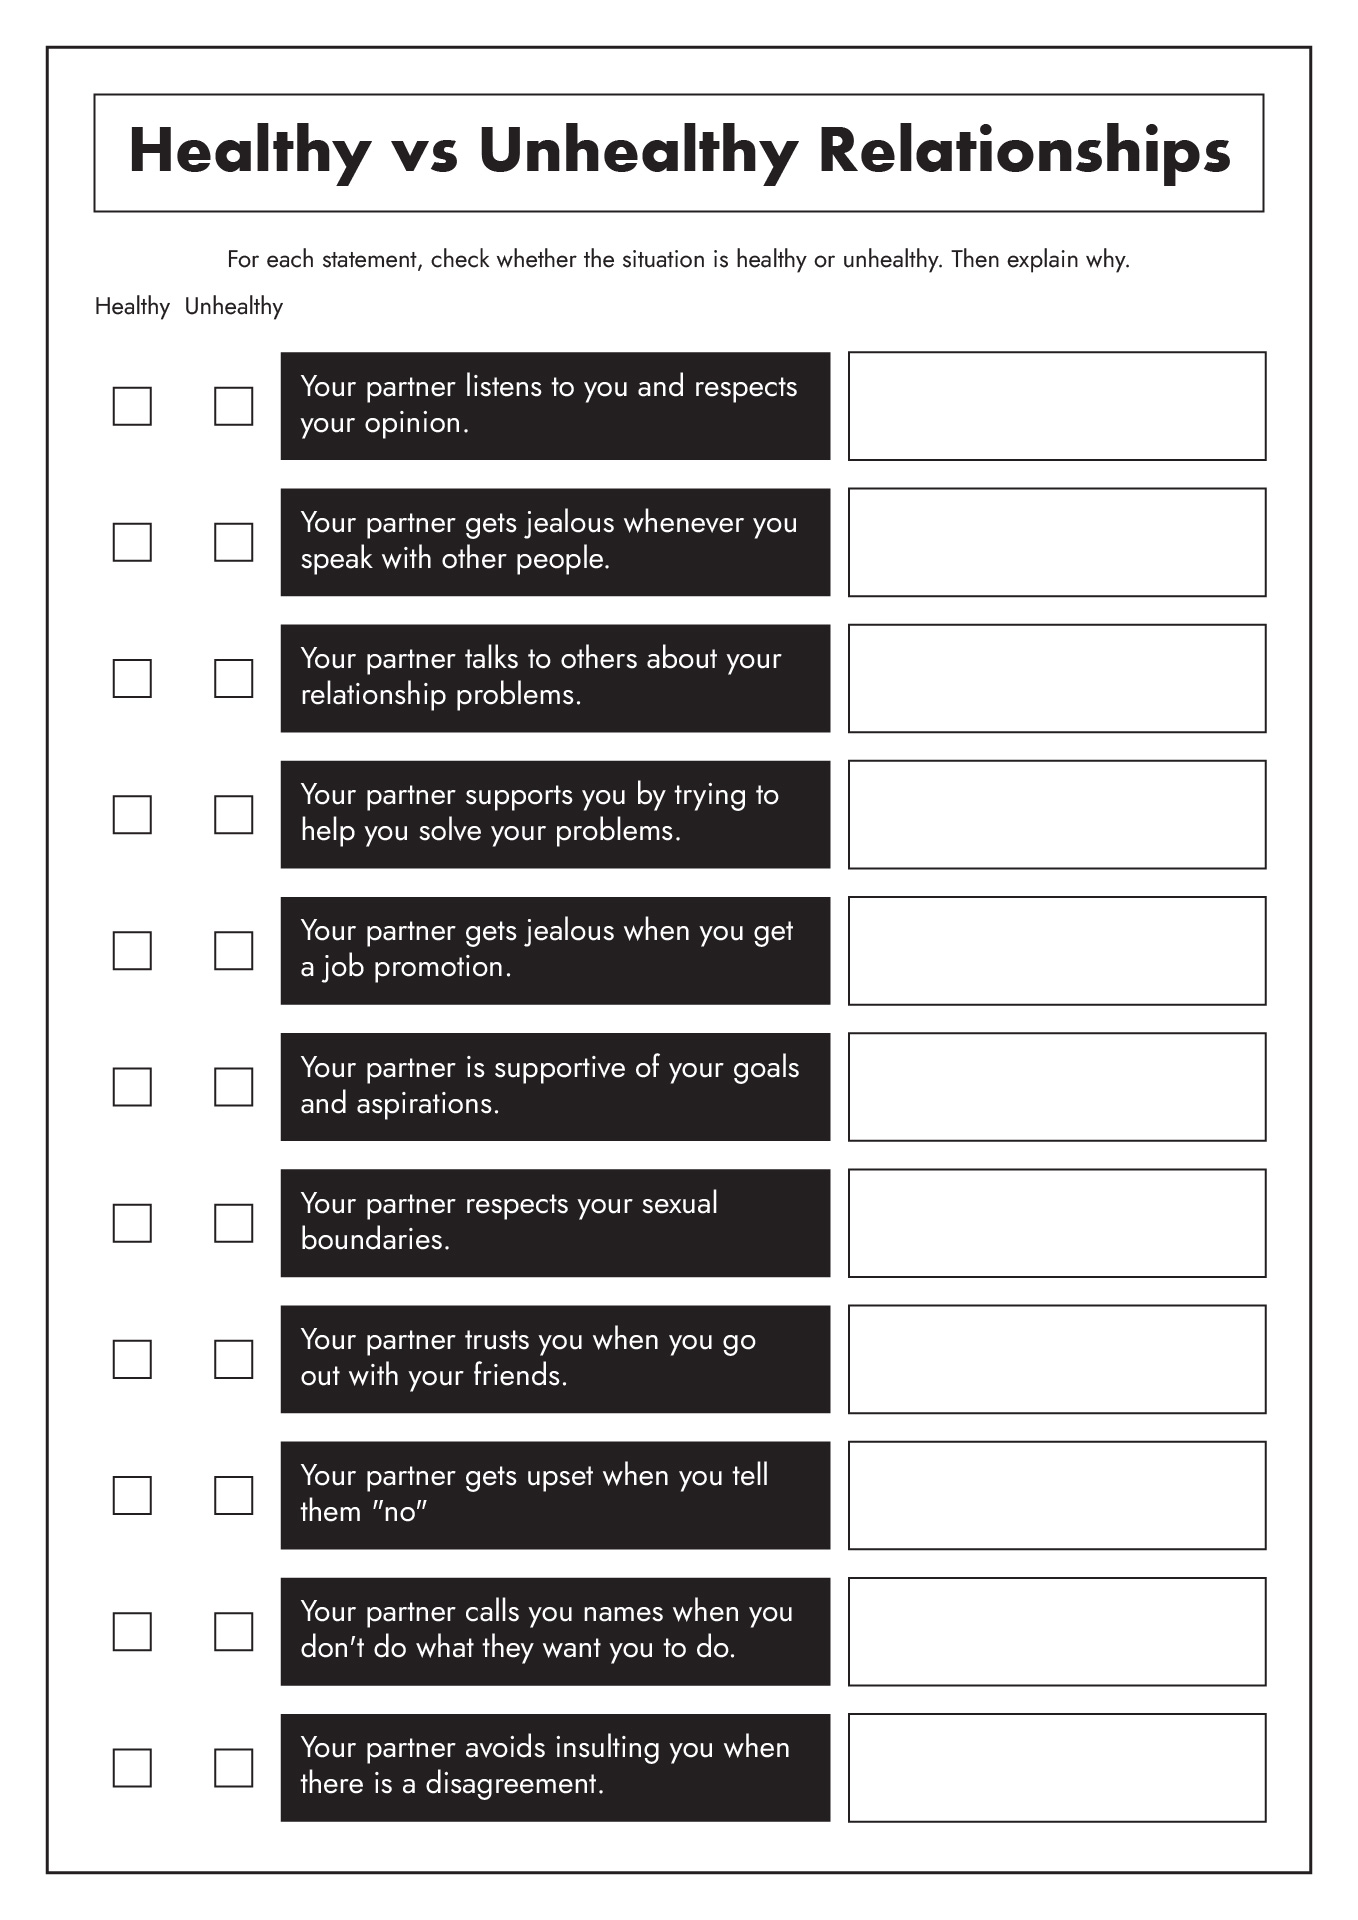 Healthy vs Unhealthy Relationships Worksheets